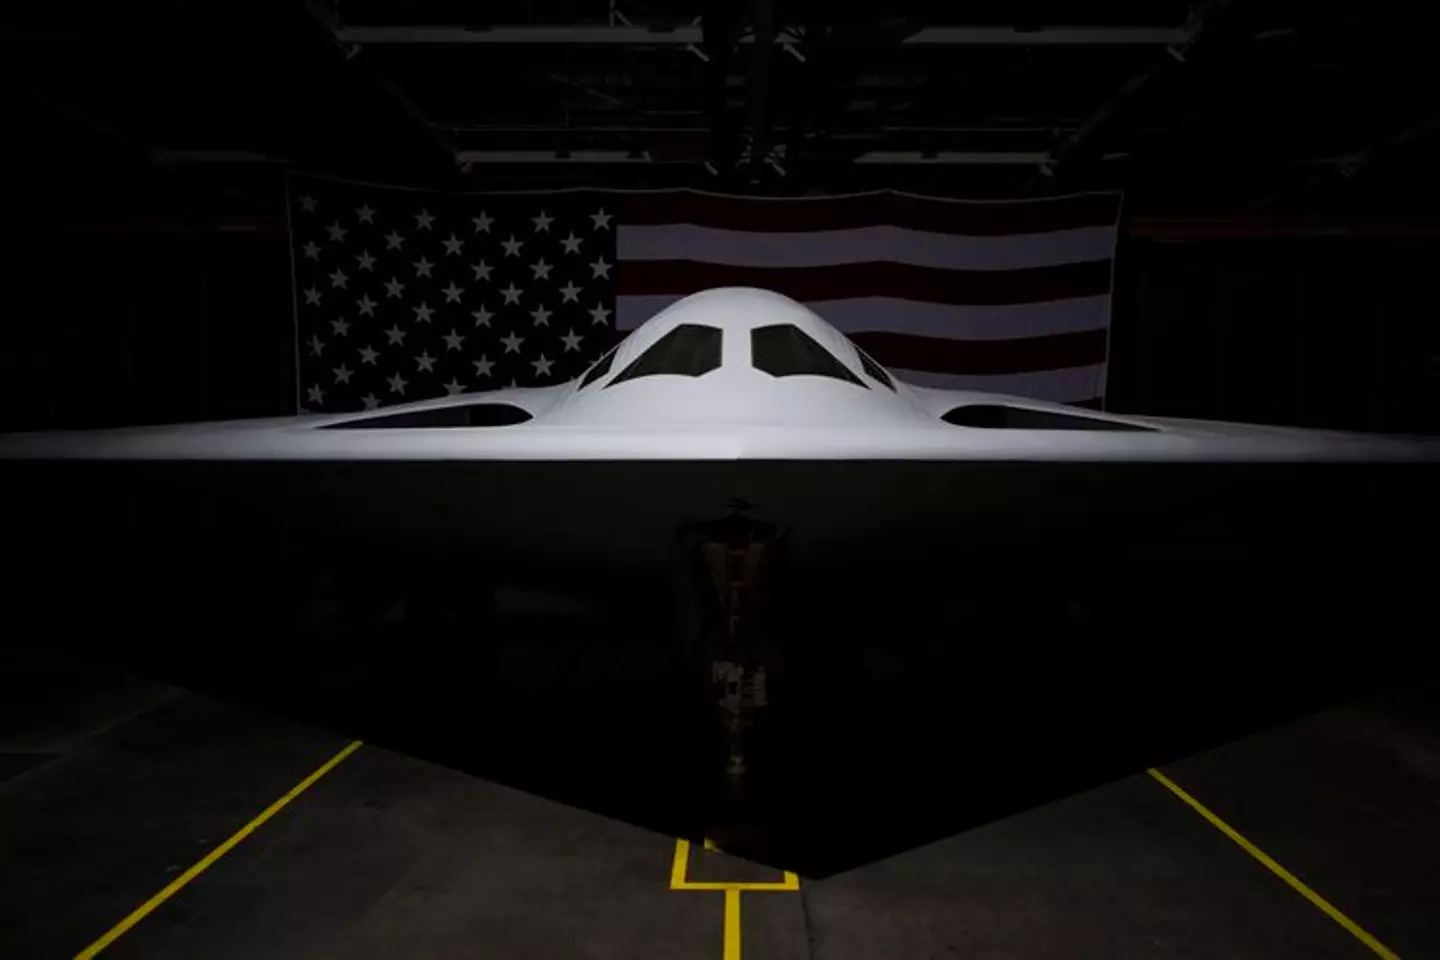 The B-21 Raider is said to be 'capable of penetrating the toughest defences'.